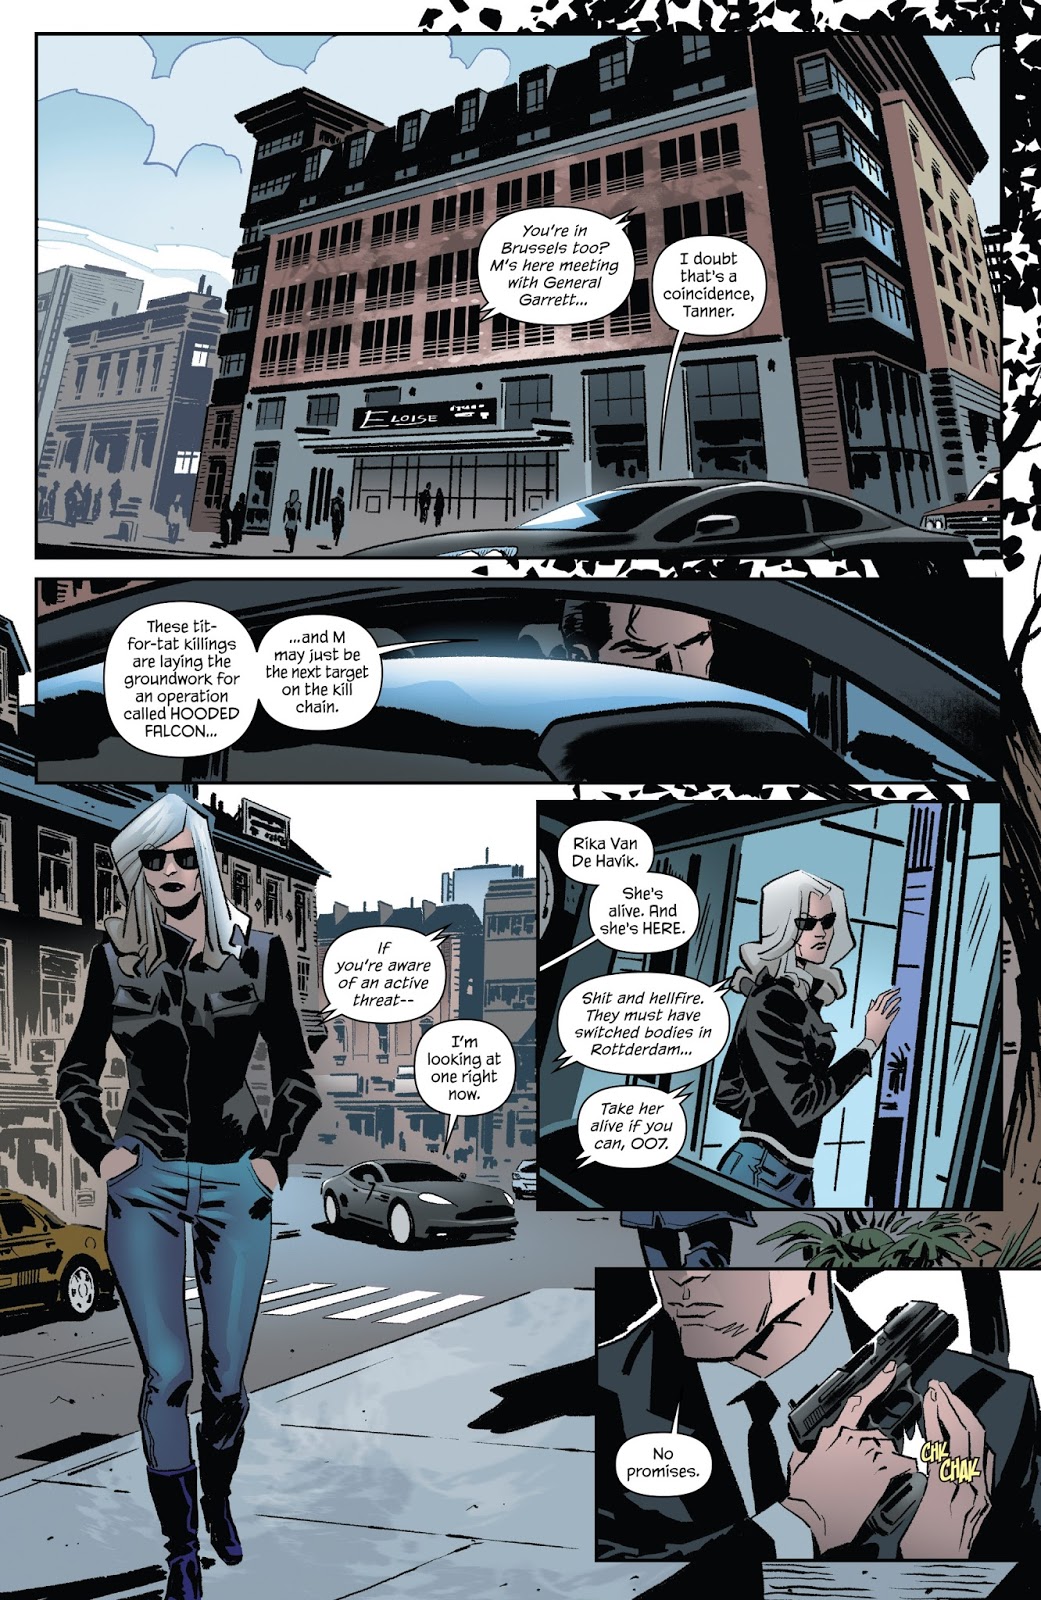 James Bond: Kill Chain issue 4 - Page 6